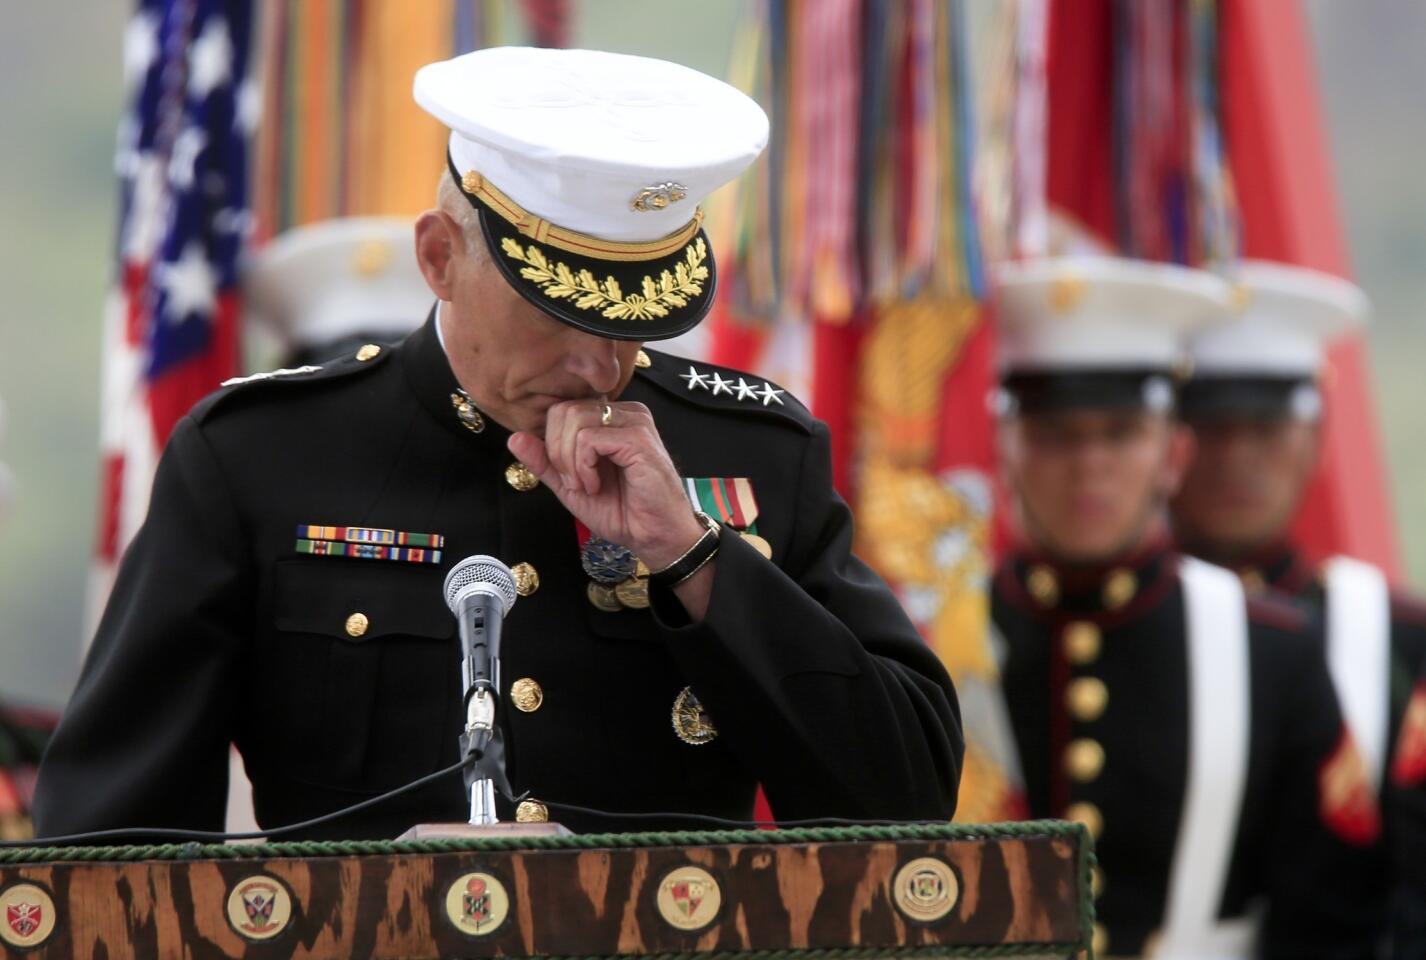 Marine Gen. John Kelly, whose son Robert was killed in Afghanistan, speaks at the dedication of the memorial to the Marines and sailors from the 5th Regiment who were killed in Afghanistan.